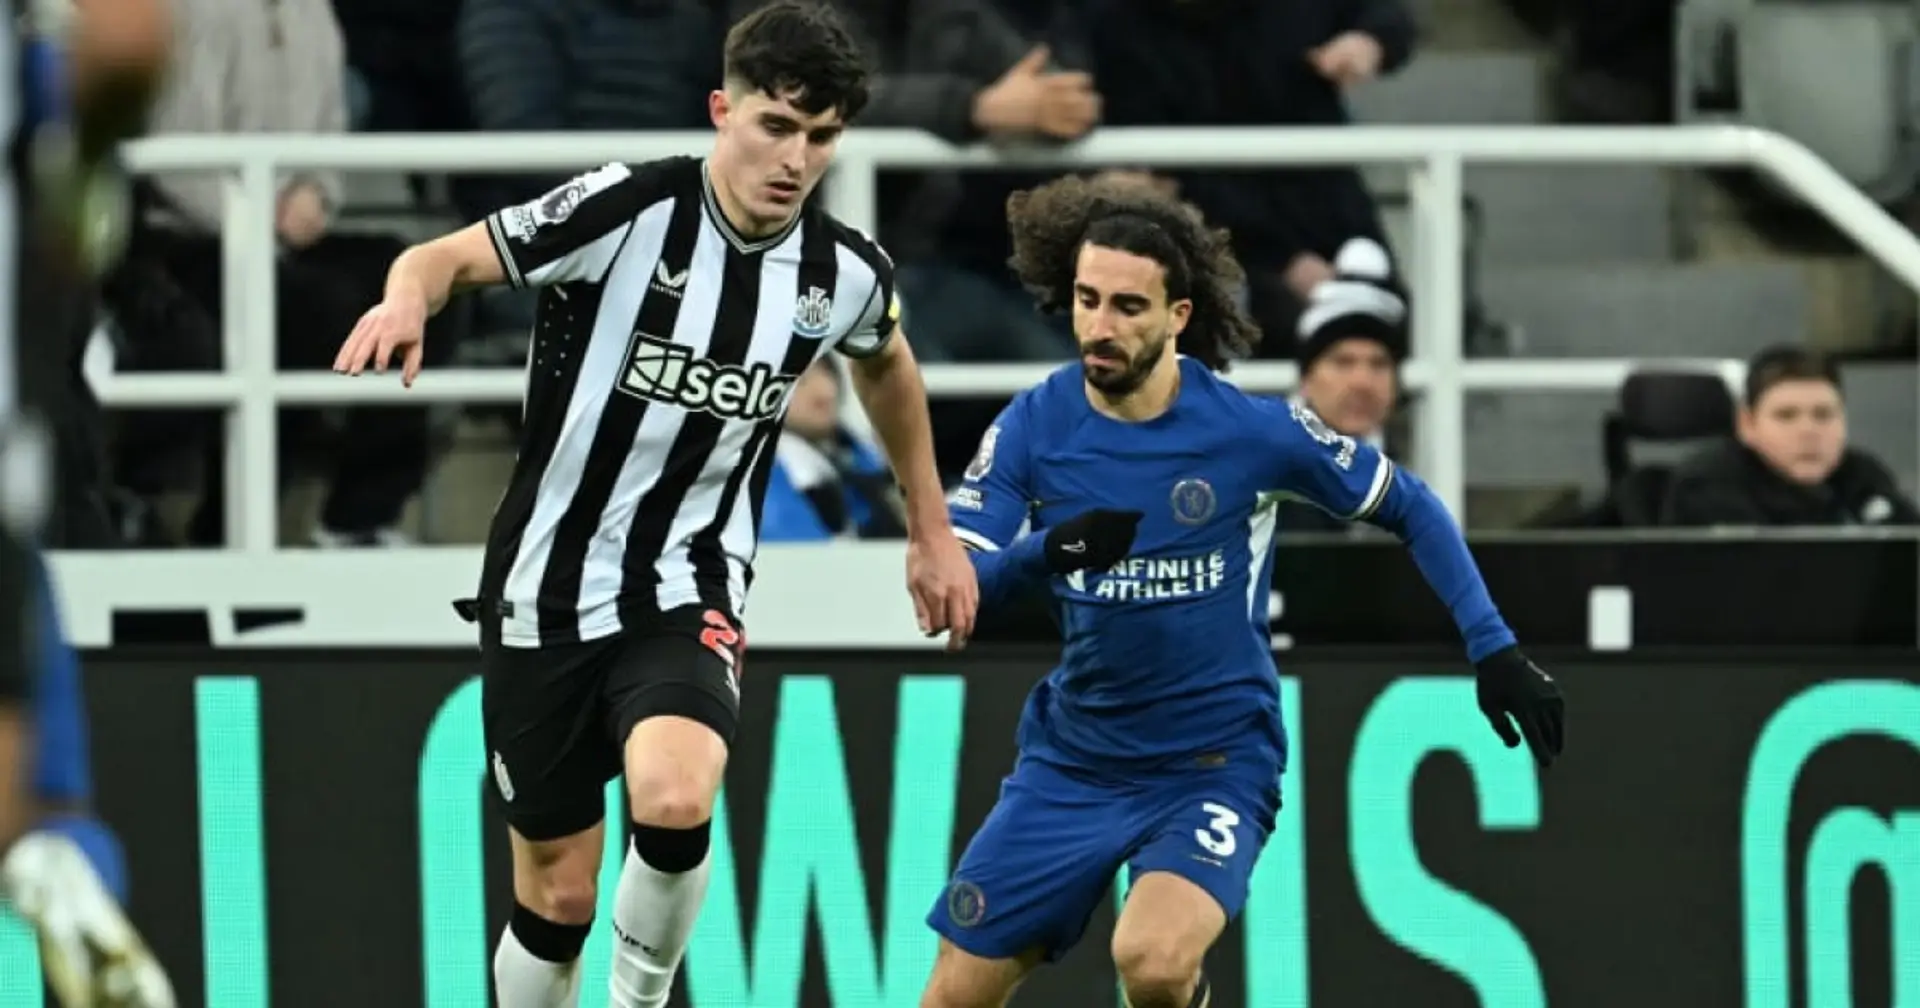 'Every duel we lost gave them more confidence': Cucurella on the lack of character in Newcastle game 